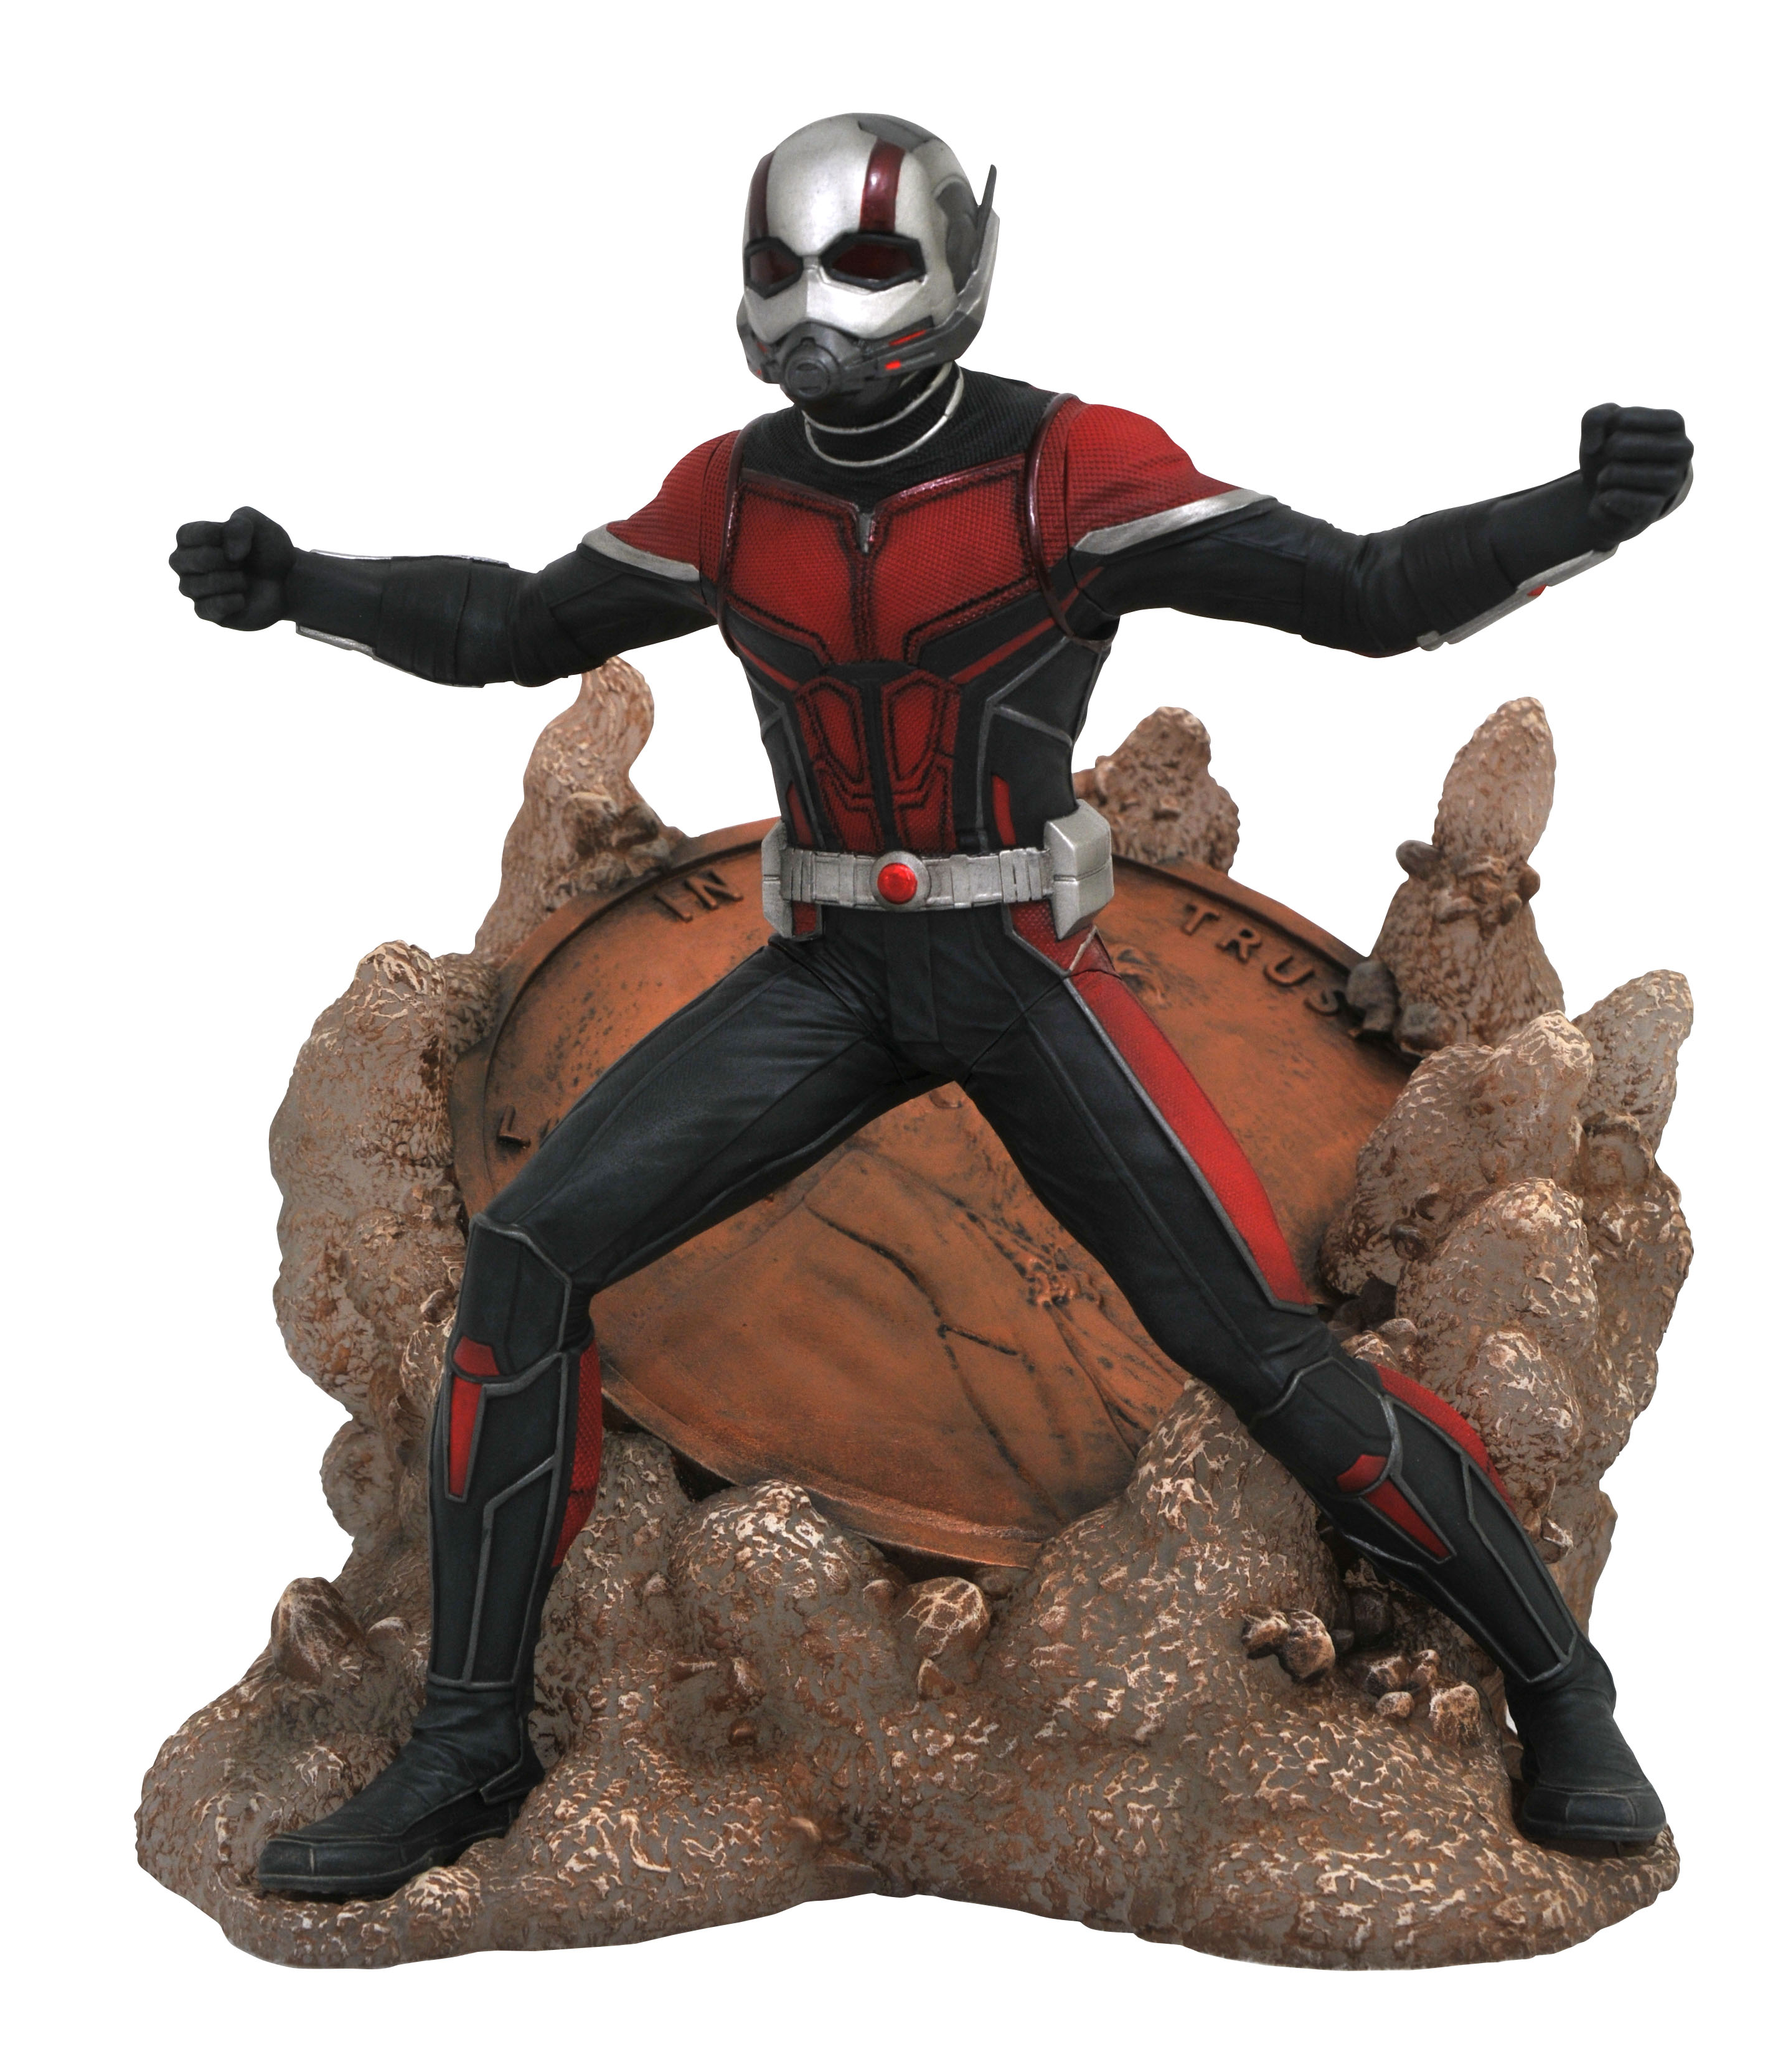 Marvel Gallery: Ant-Man and The Wasp Movie: Ant-Man PVC Figure